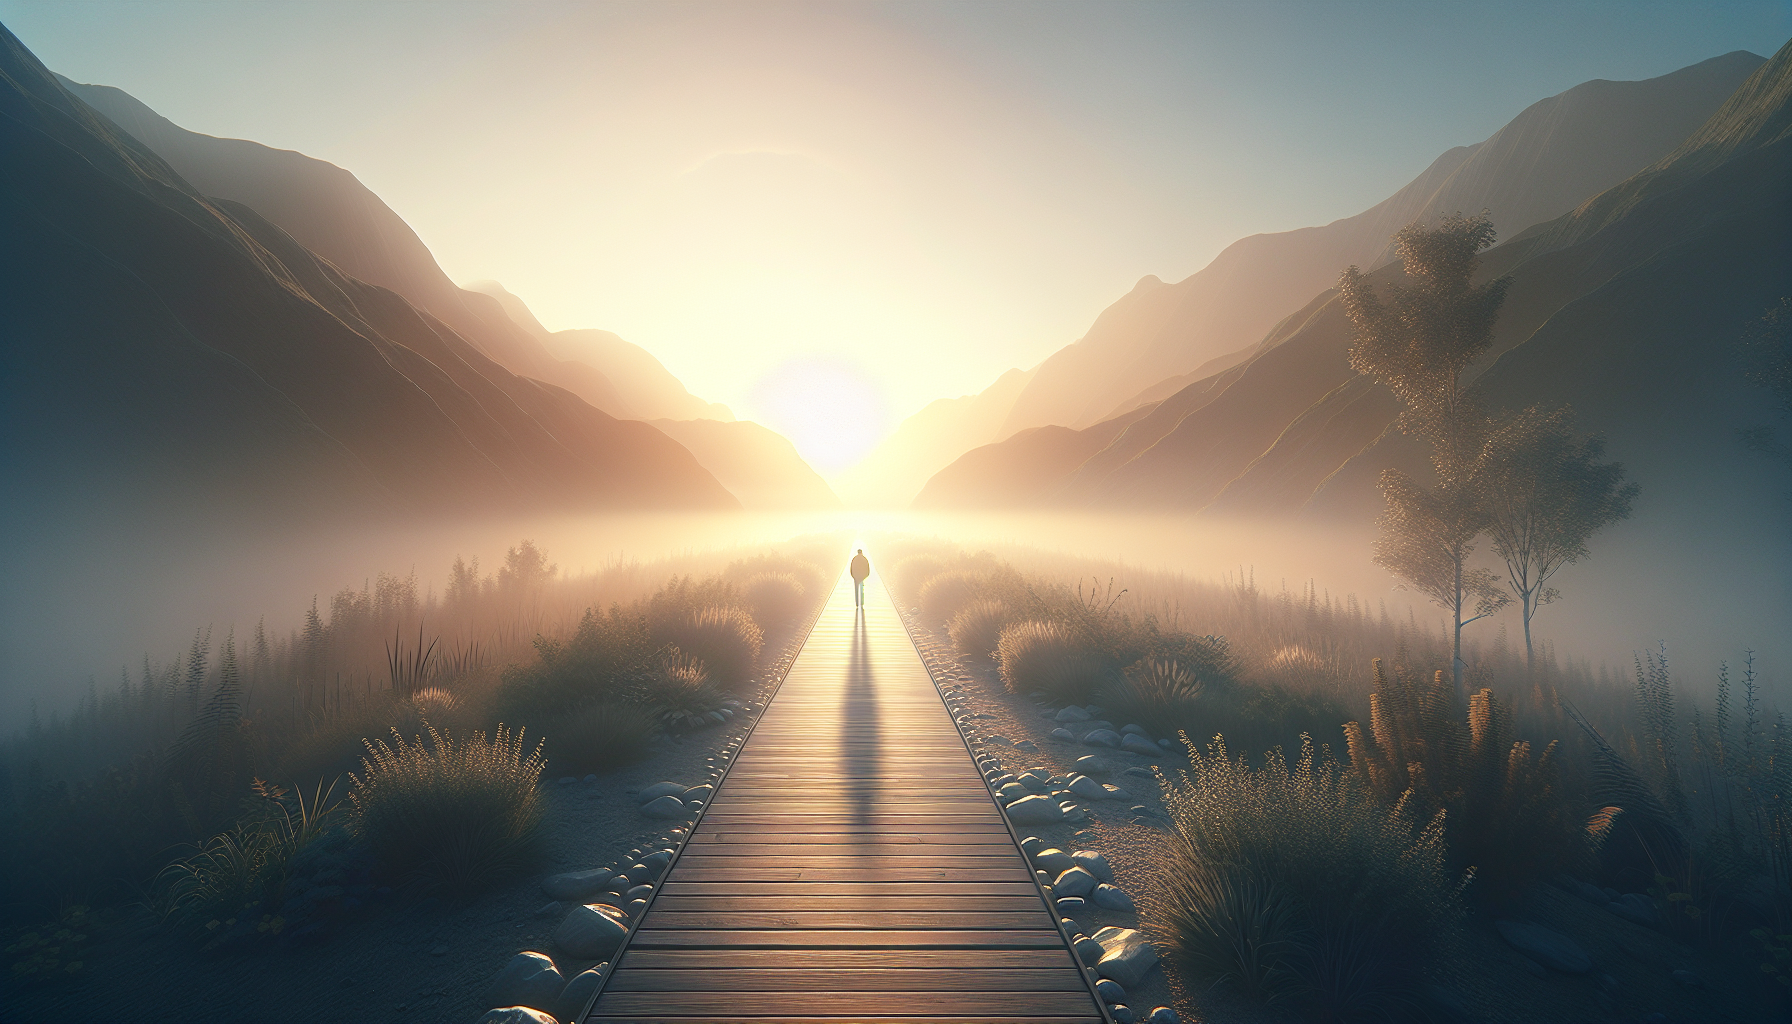 A lone silhouette stands at the end of a wooden boardwalk extending through a misty landscape towards the rising sun, with mountain silhouettes in the background.